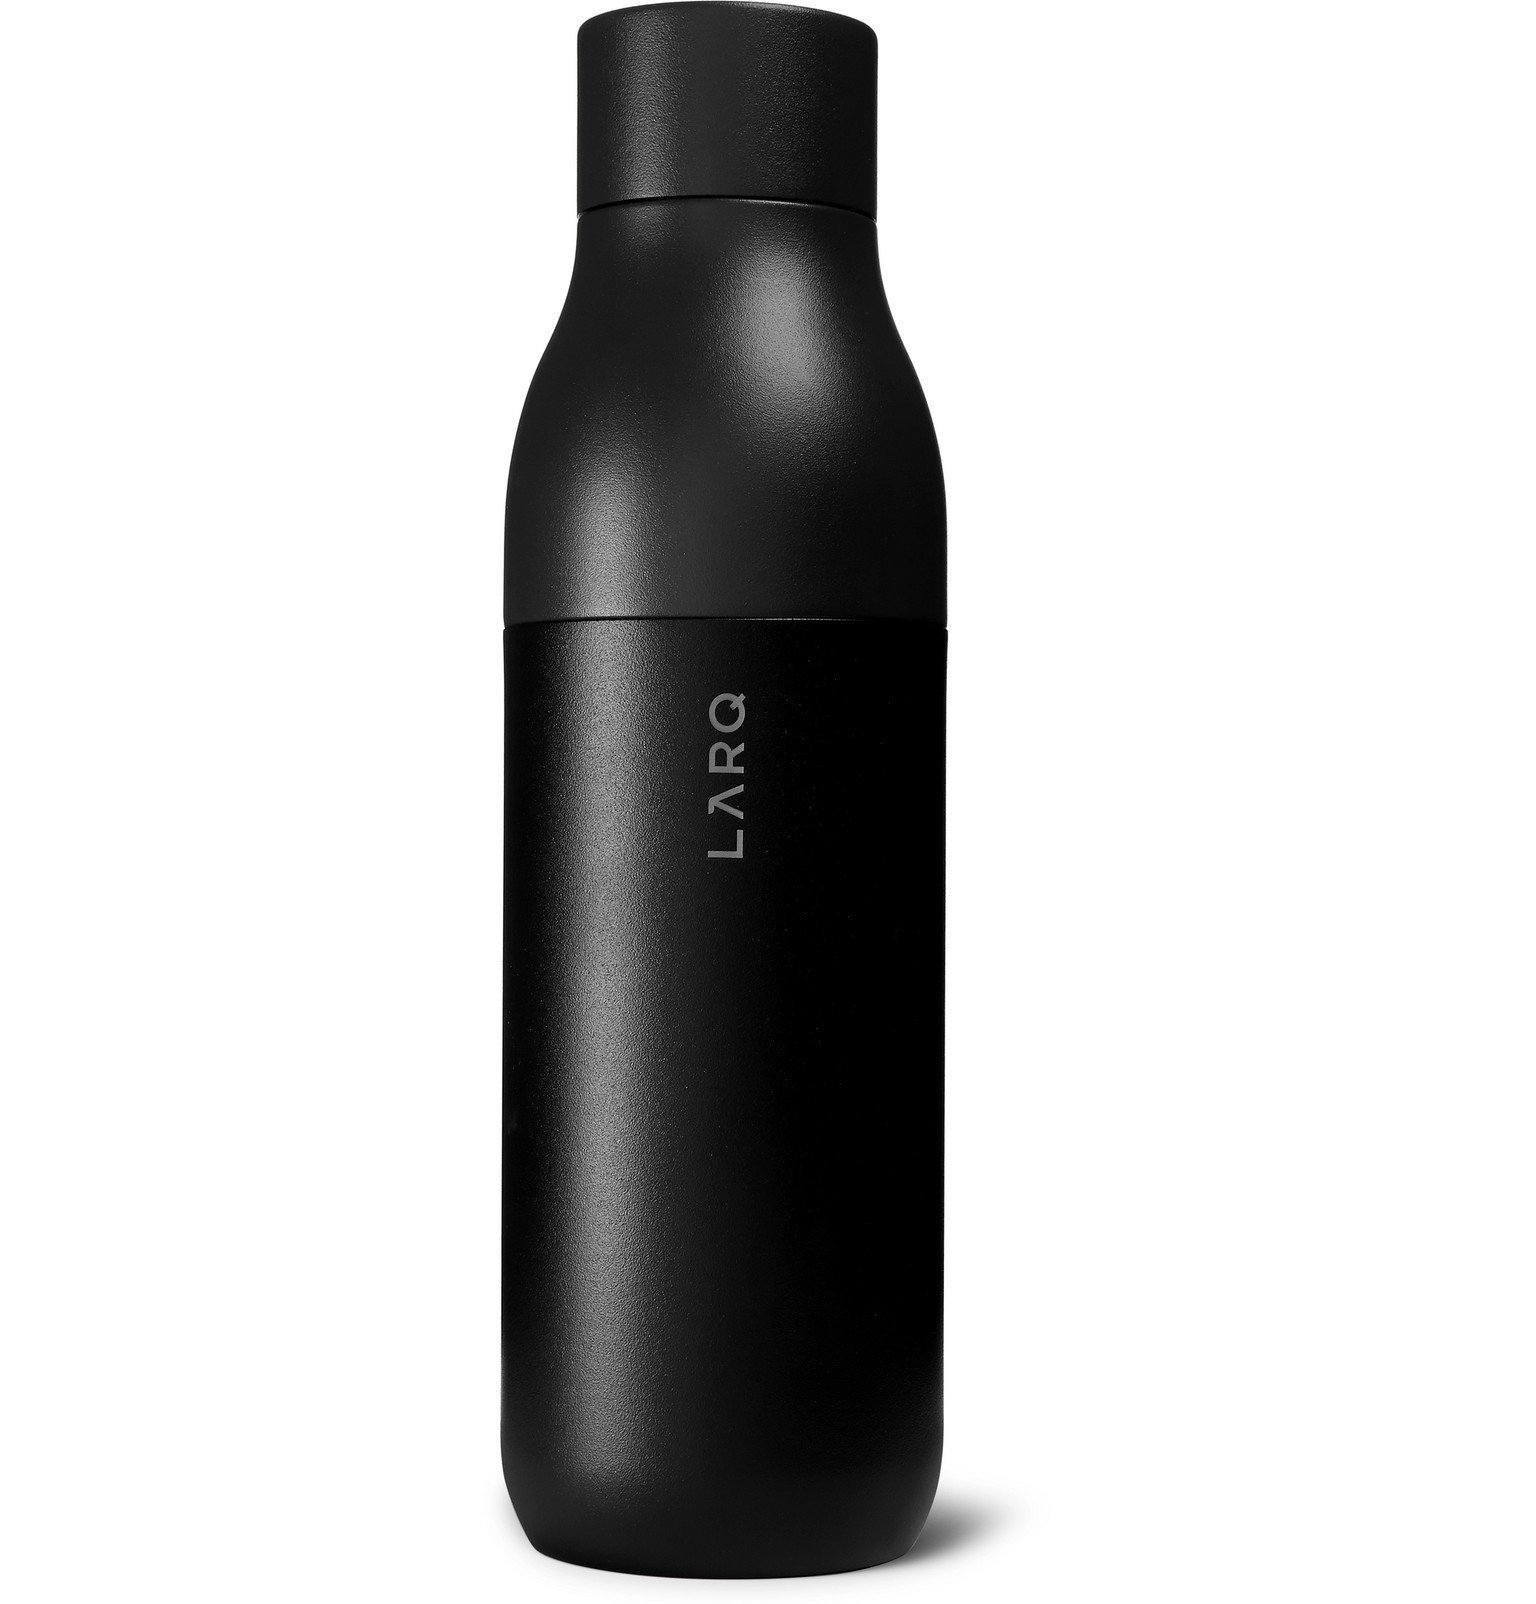 LARQ Self-Cleaning Water Bottle & Water Purification System 740ML Black 